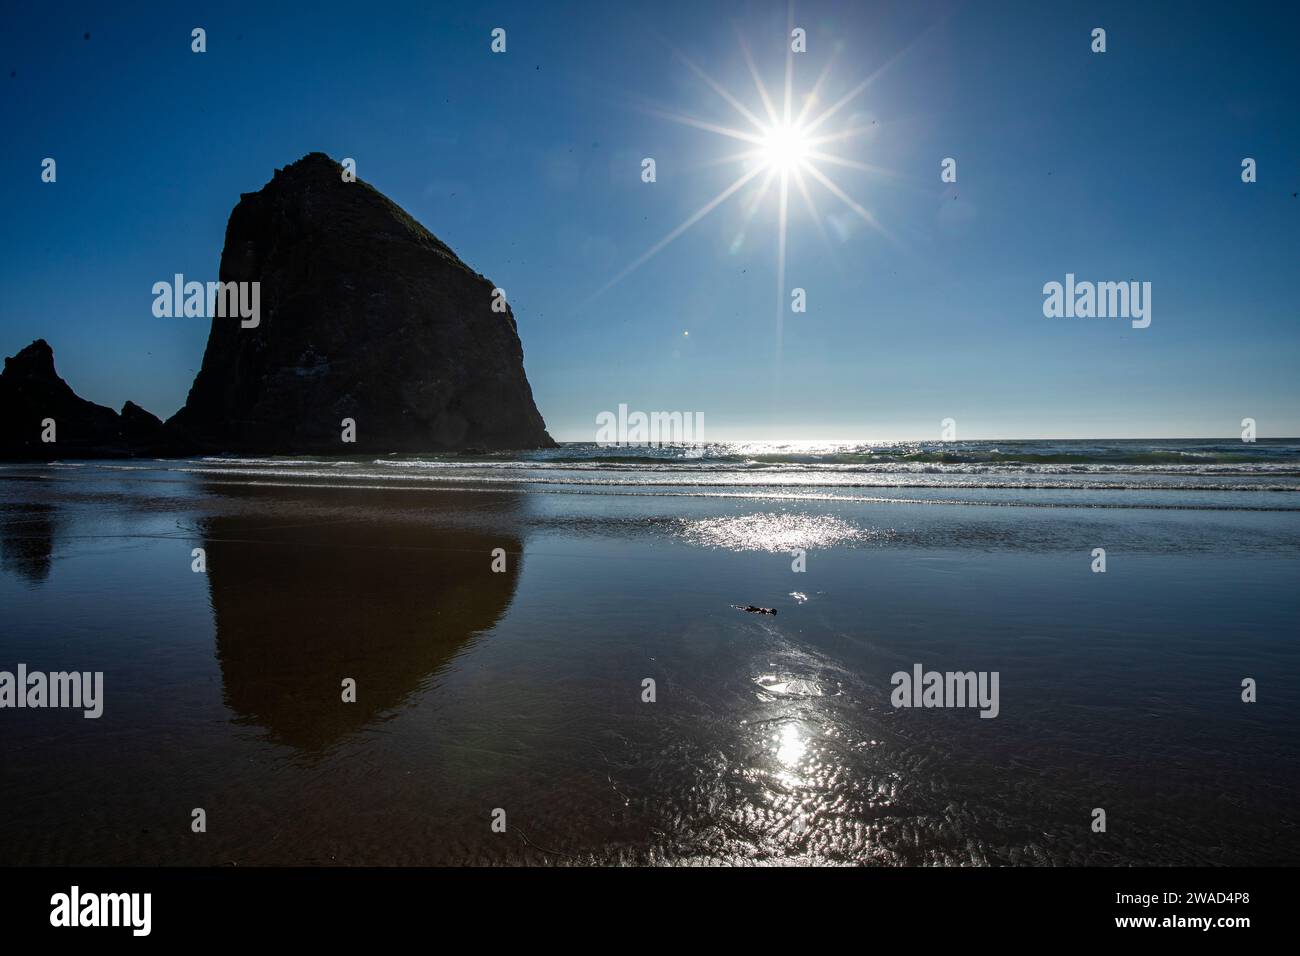 USA, Oregon, Silhouette of Haystack Rock at Cannon Beach Stock Photo